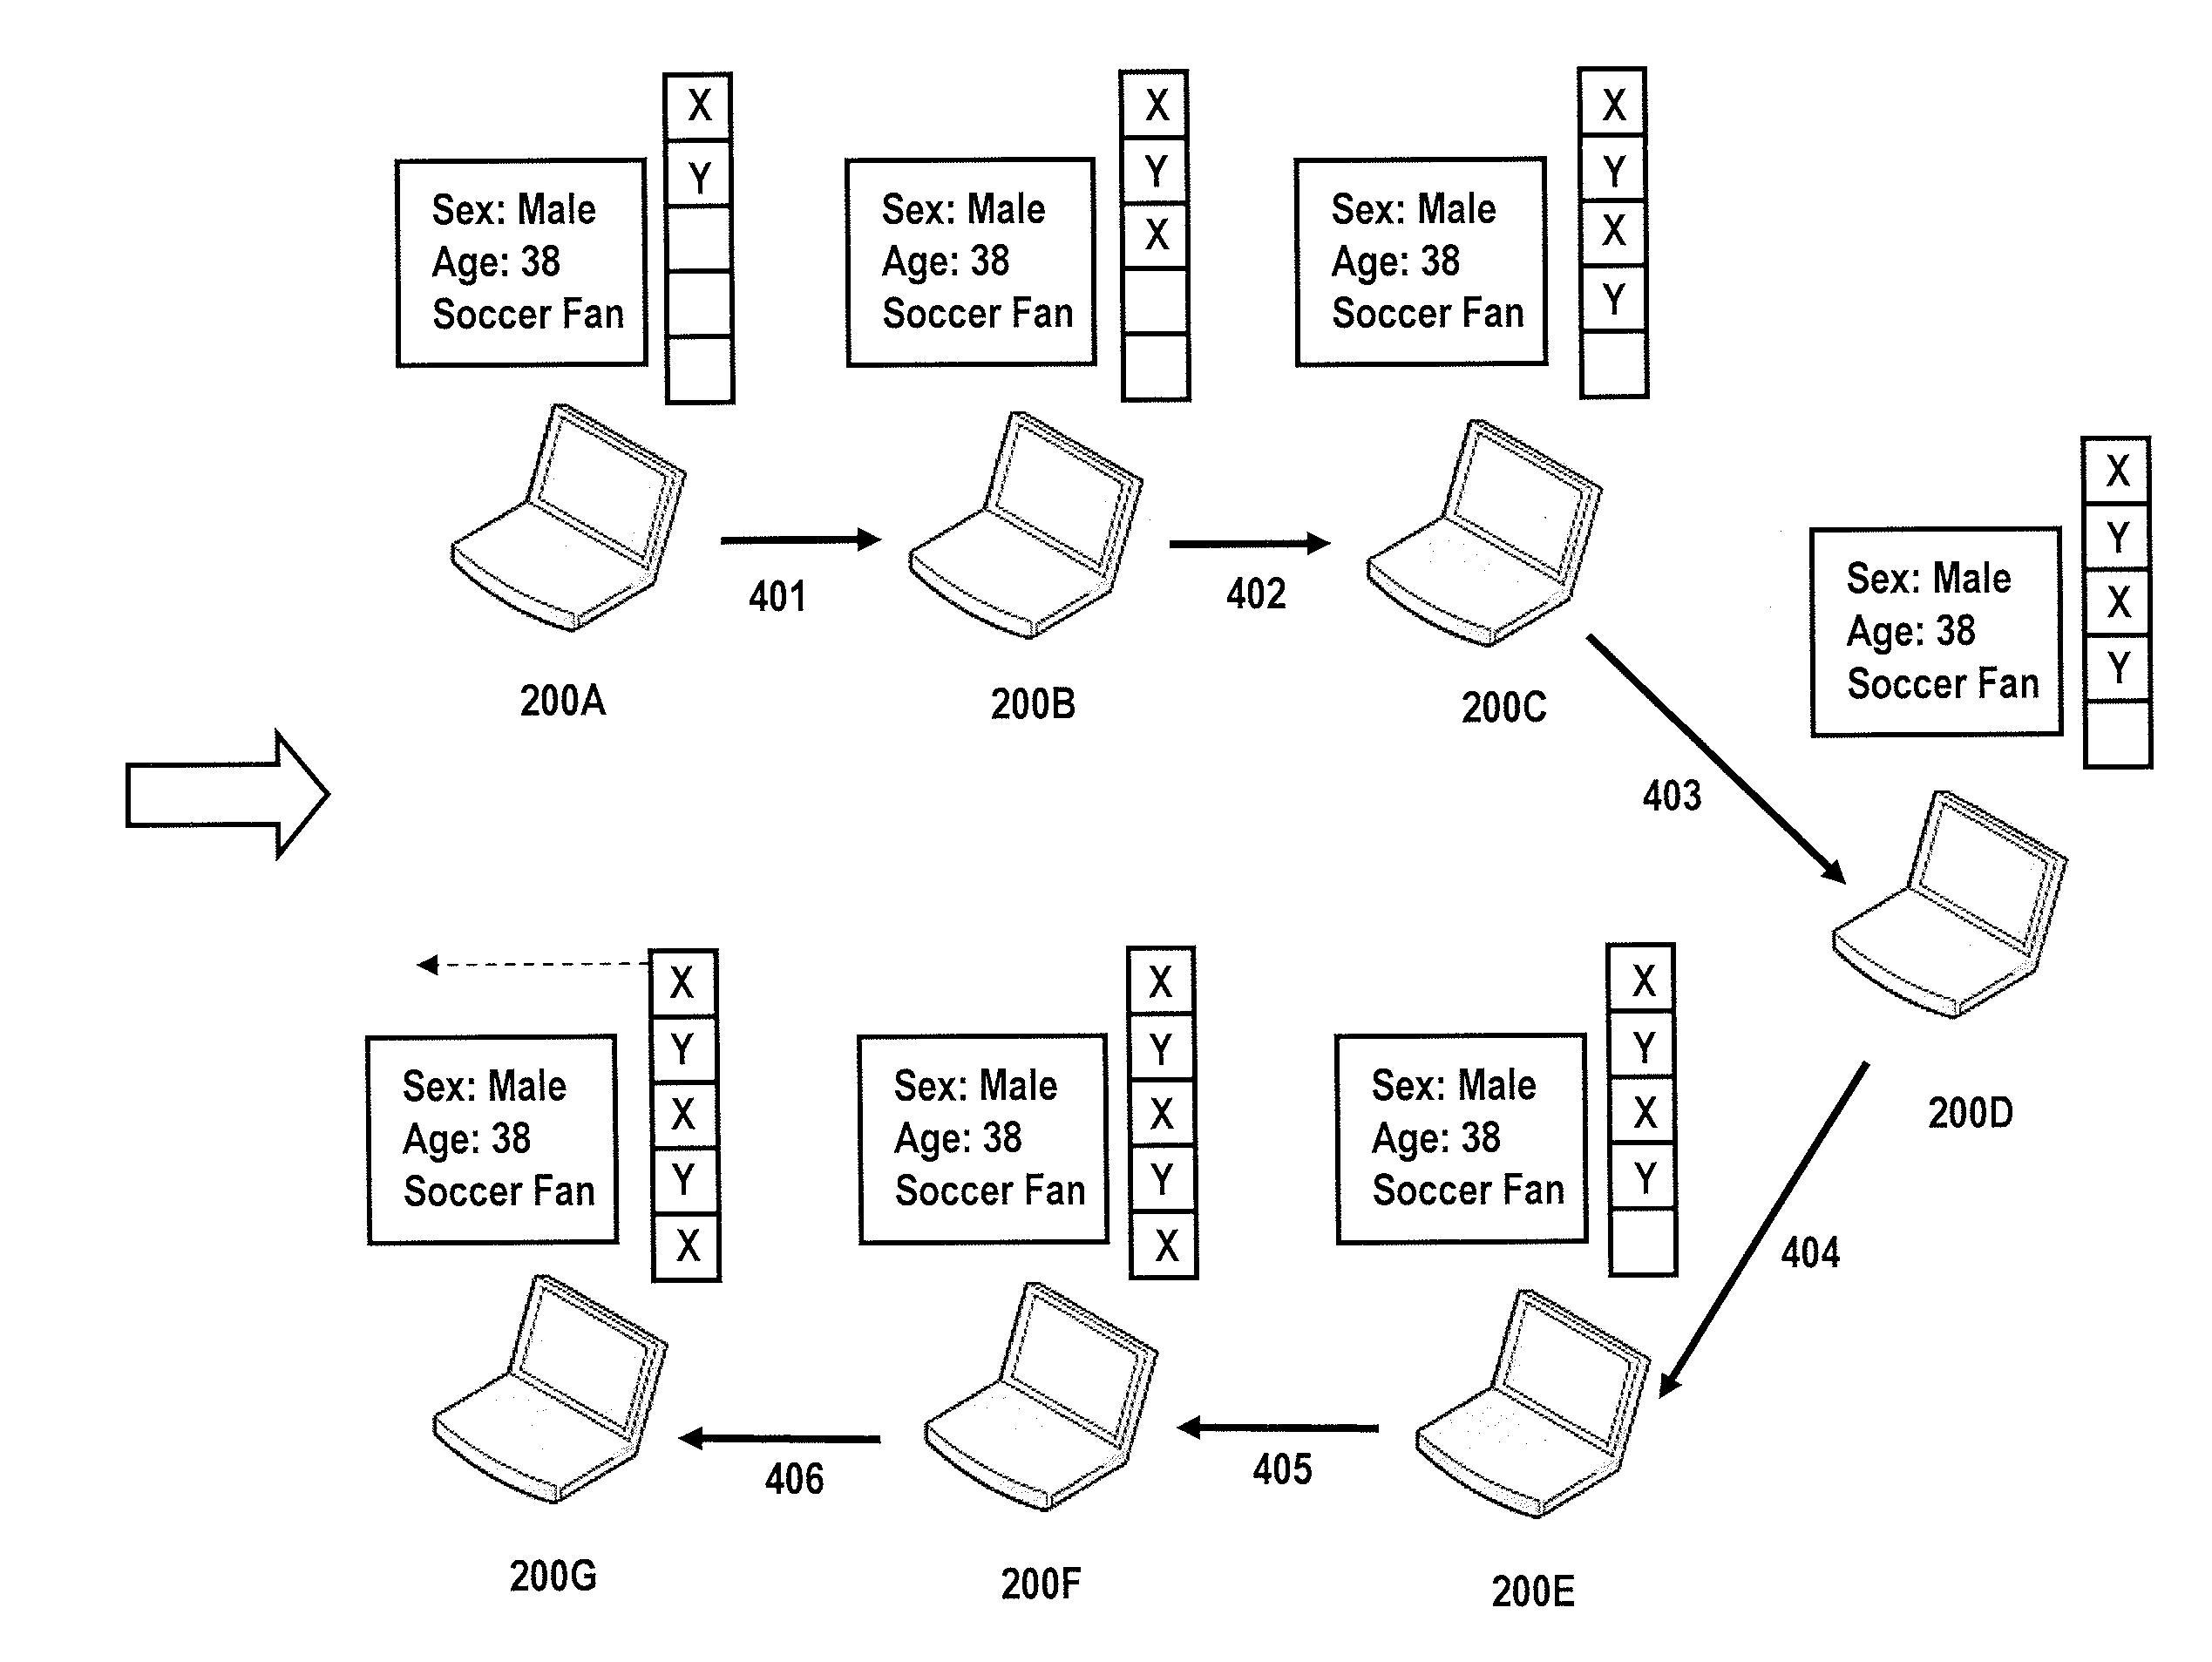 System and Method for Peer-to-Peer Distribution of Media Exposure Data